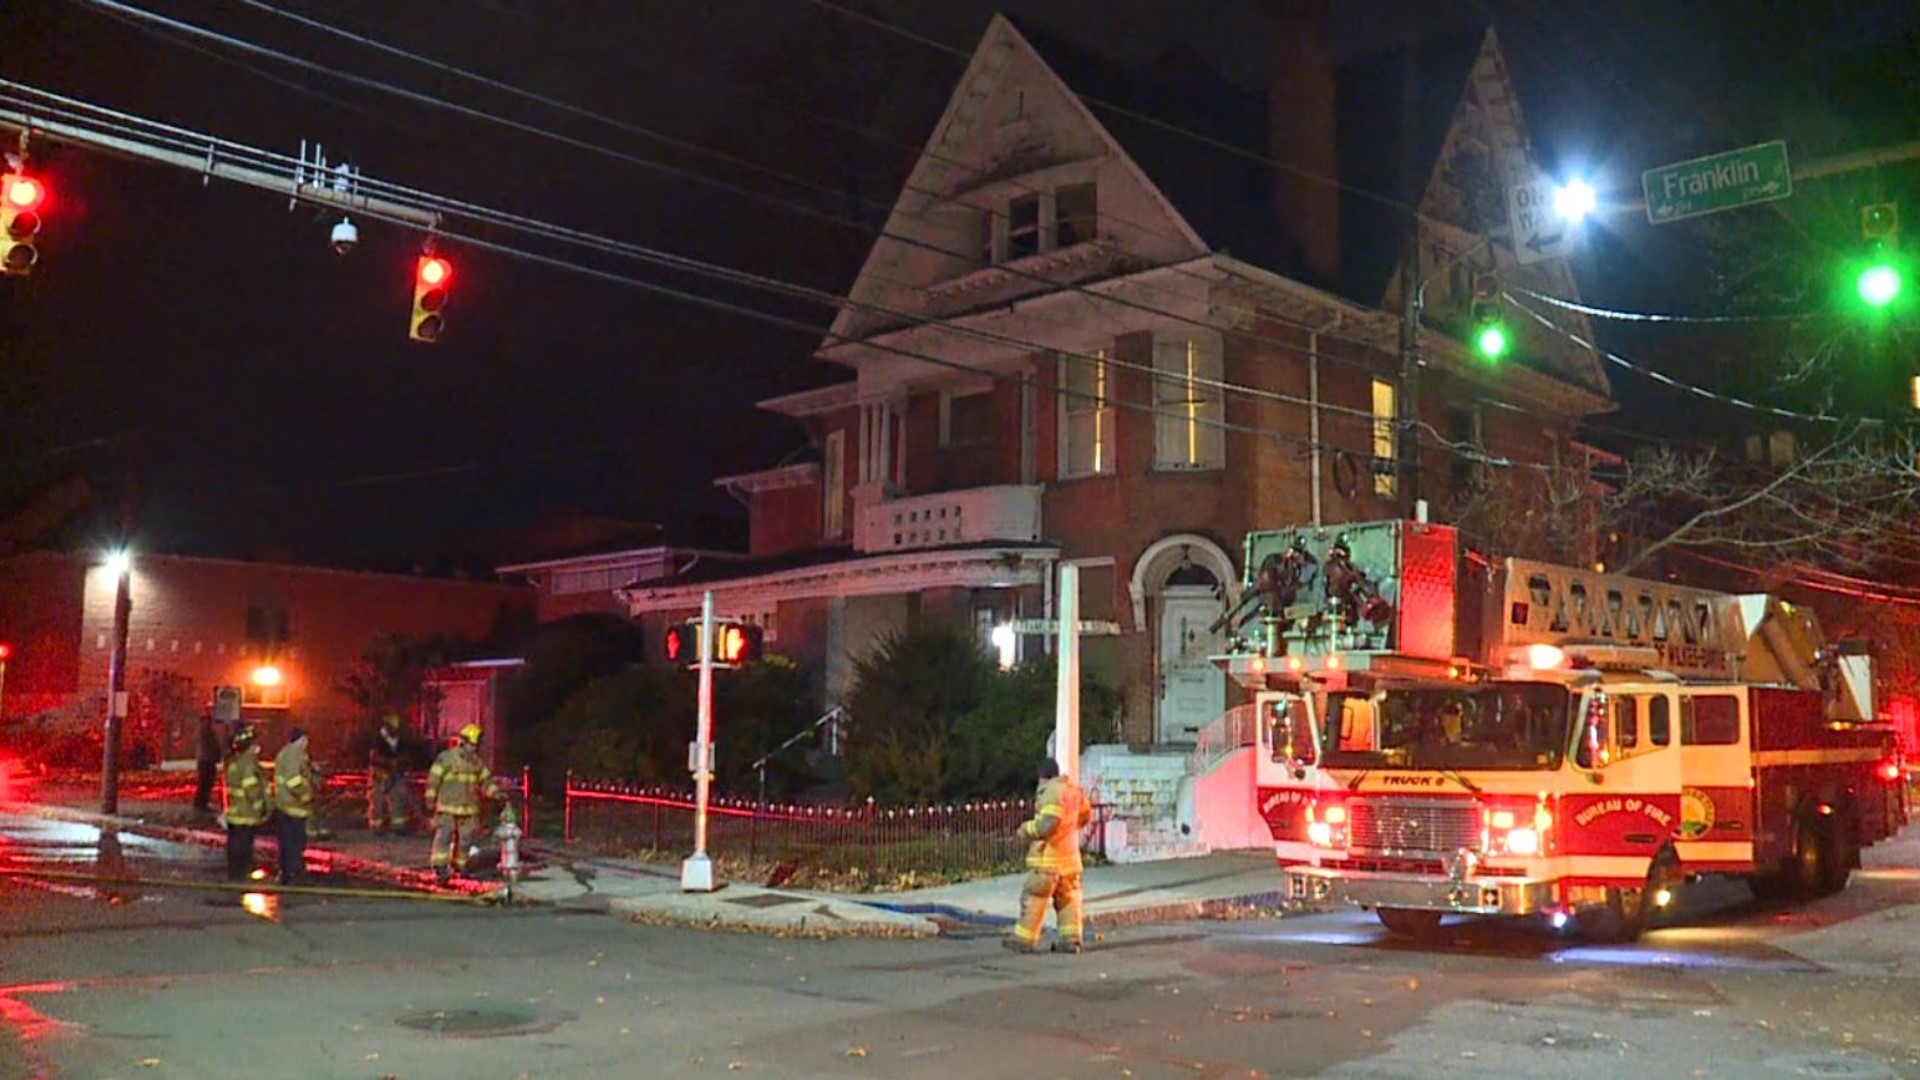 A fire damaged an apartment building early Wednesday morning in Wilkes-Barre.